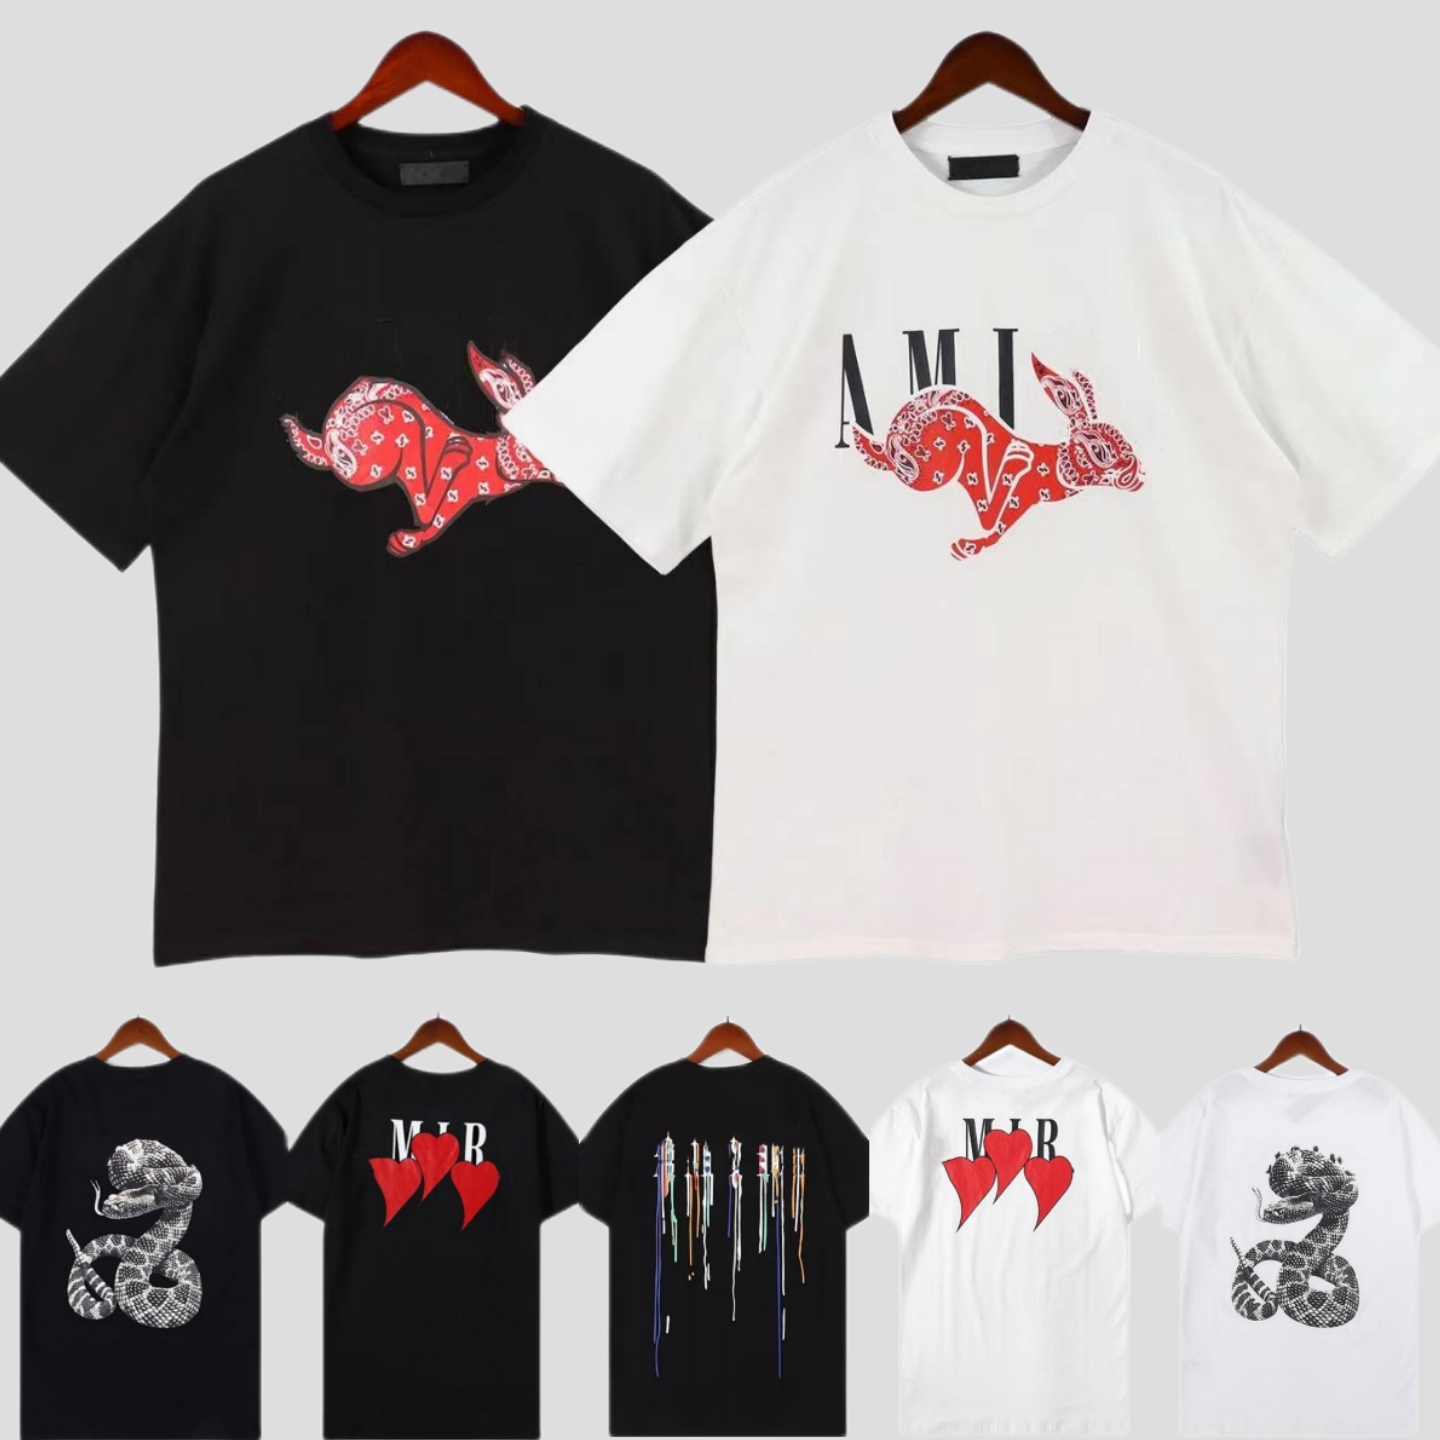 

Limited edition designer t shirt of 2023 rabbit year new couples tees street wear summer fashion shirt splash-ink letter print design couple short sleeves, No.13 ( 2 pieces 10% off )